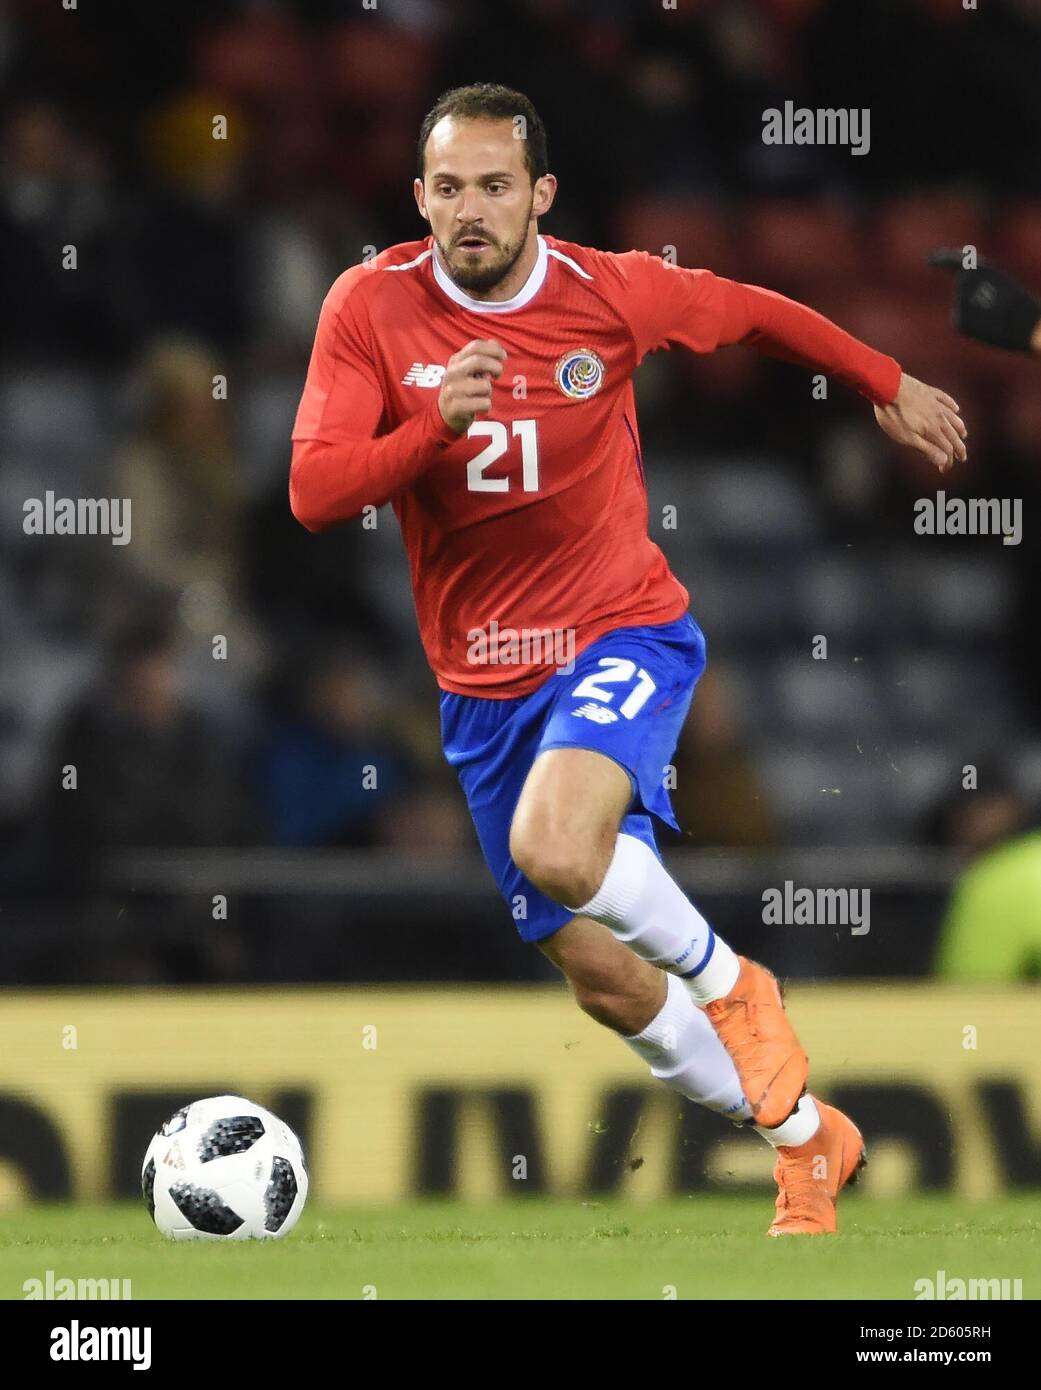 Costa Rica's Maecos Urena in action during the international friendly match at Hampden Park, Glasgow. RESTRICTIONS: Use subject to restrictions. Editorial use only. Commercial use only with prior written consent of the Scottish FA. Stock Photo